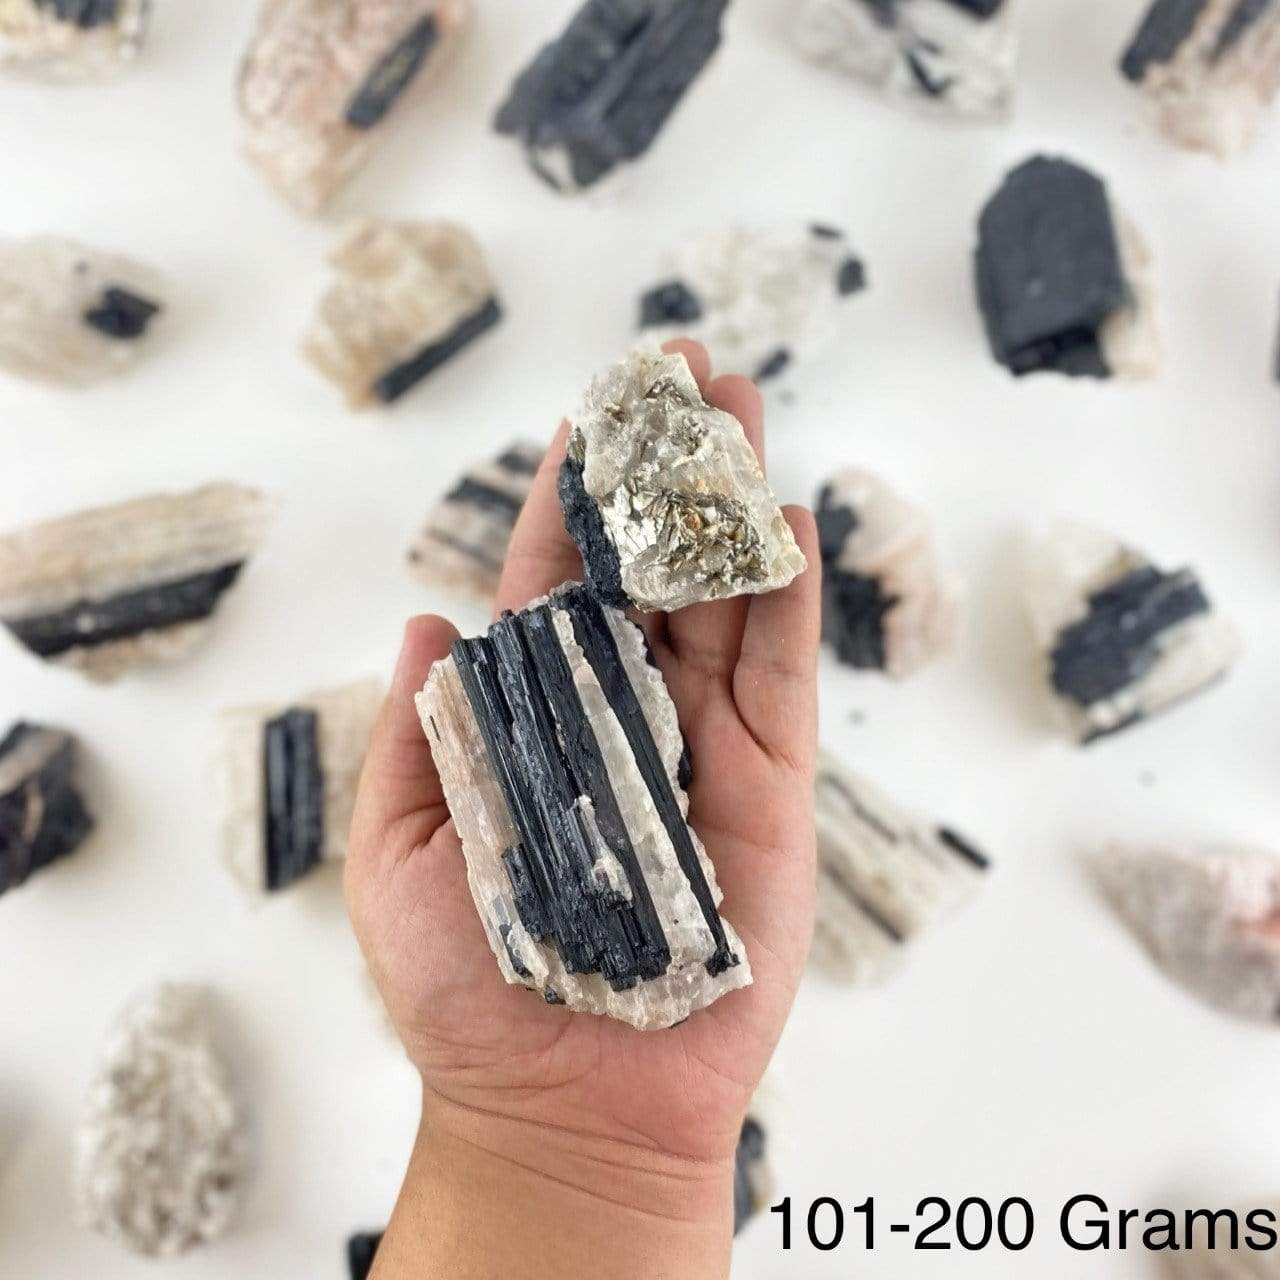 black tourmaline on matrix displayed in hand size is for 101-200 grams